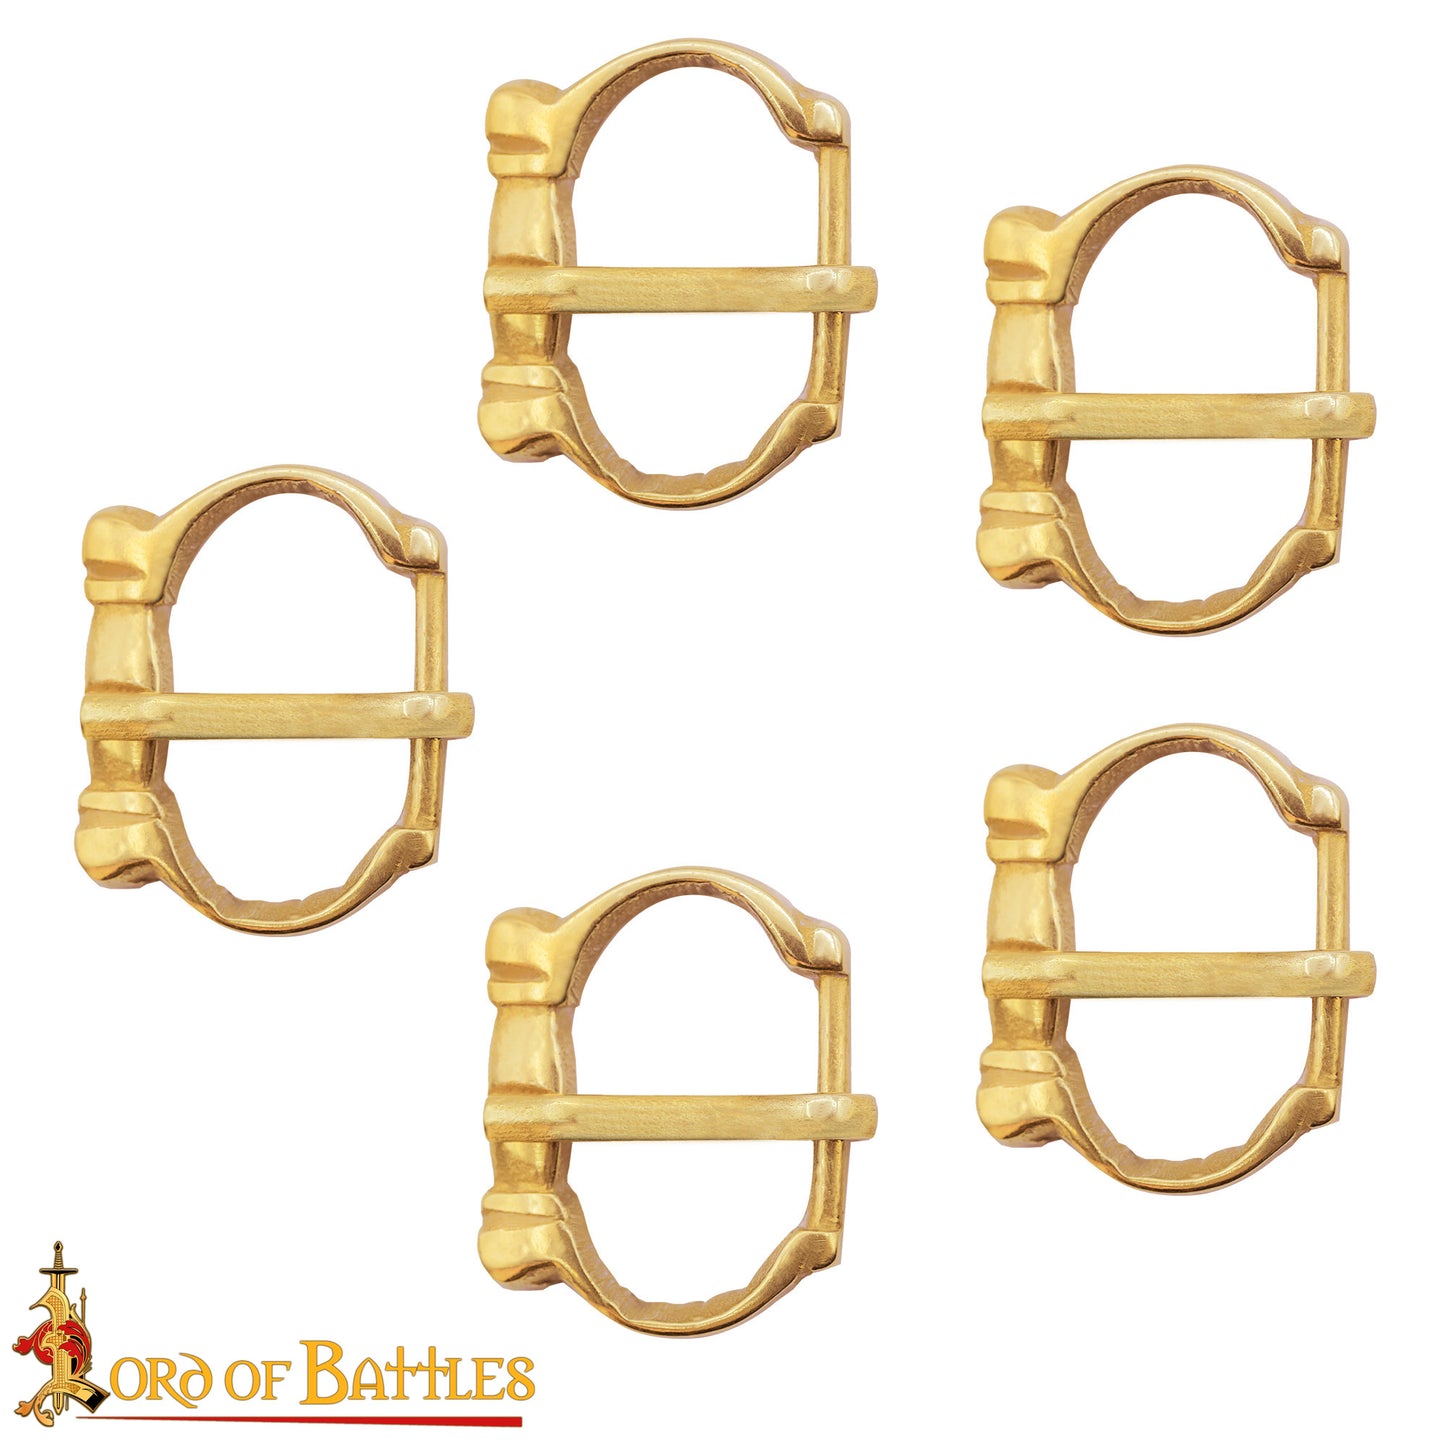 Medieval Buckle - 12th century-14th century (set of 2)